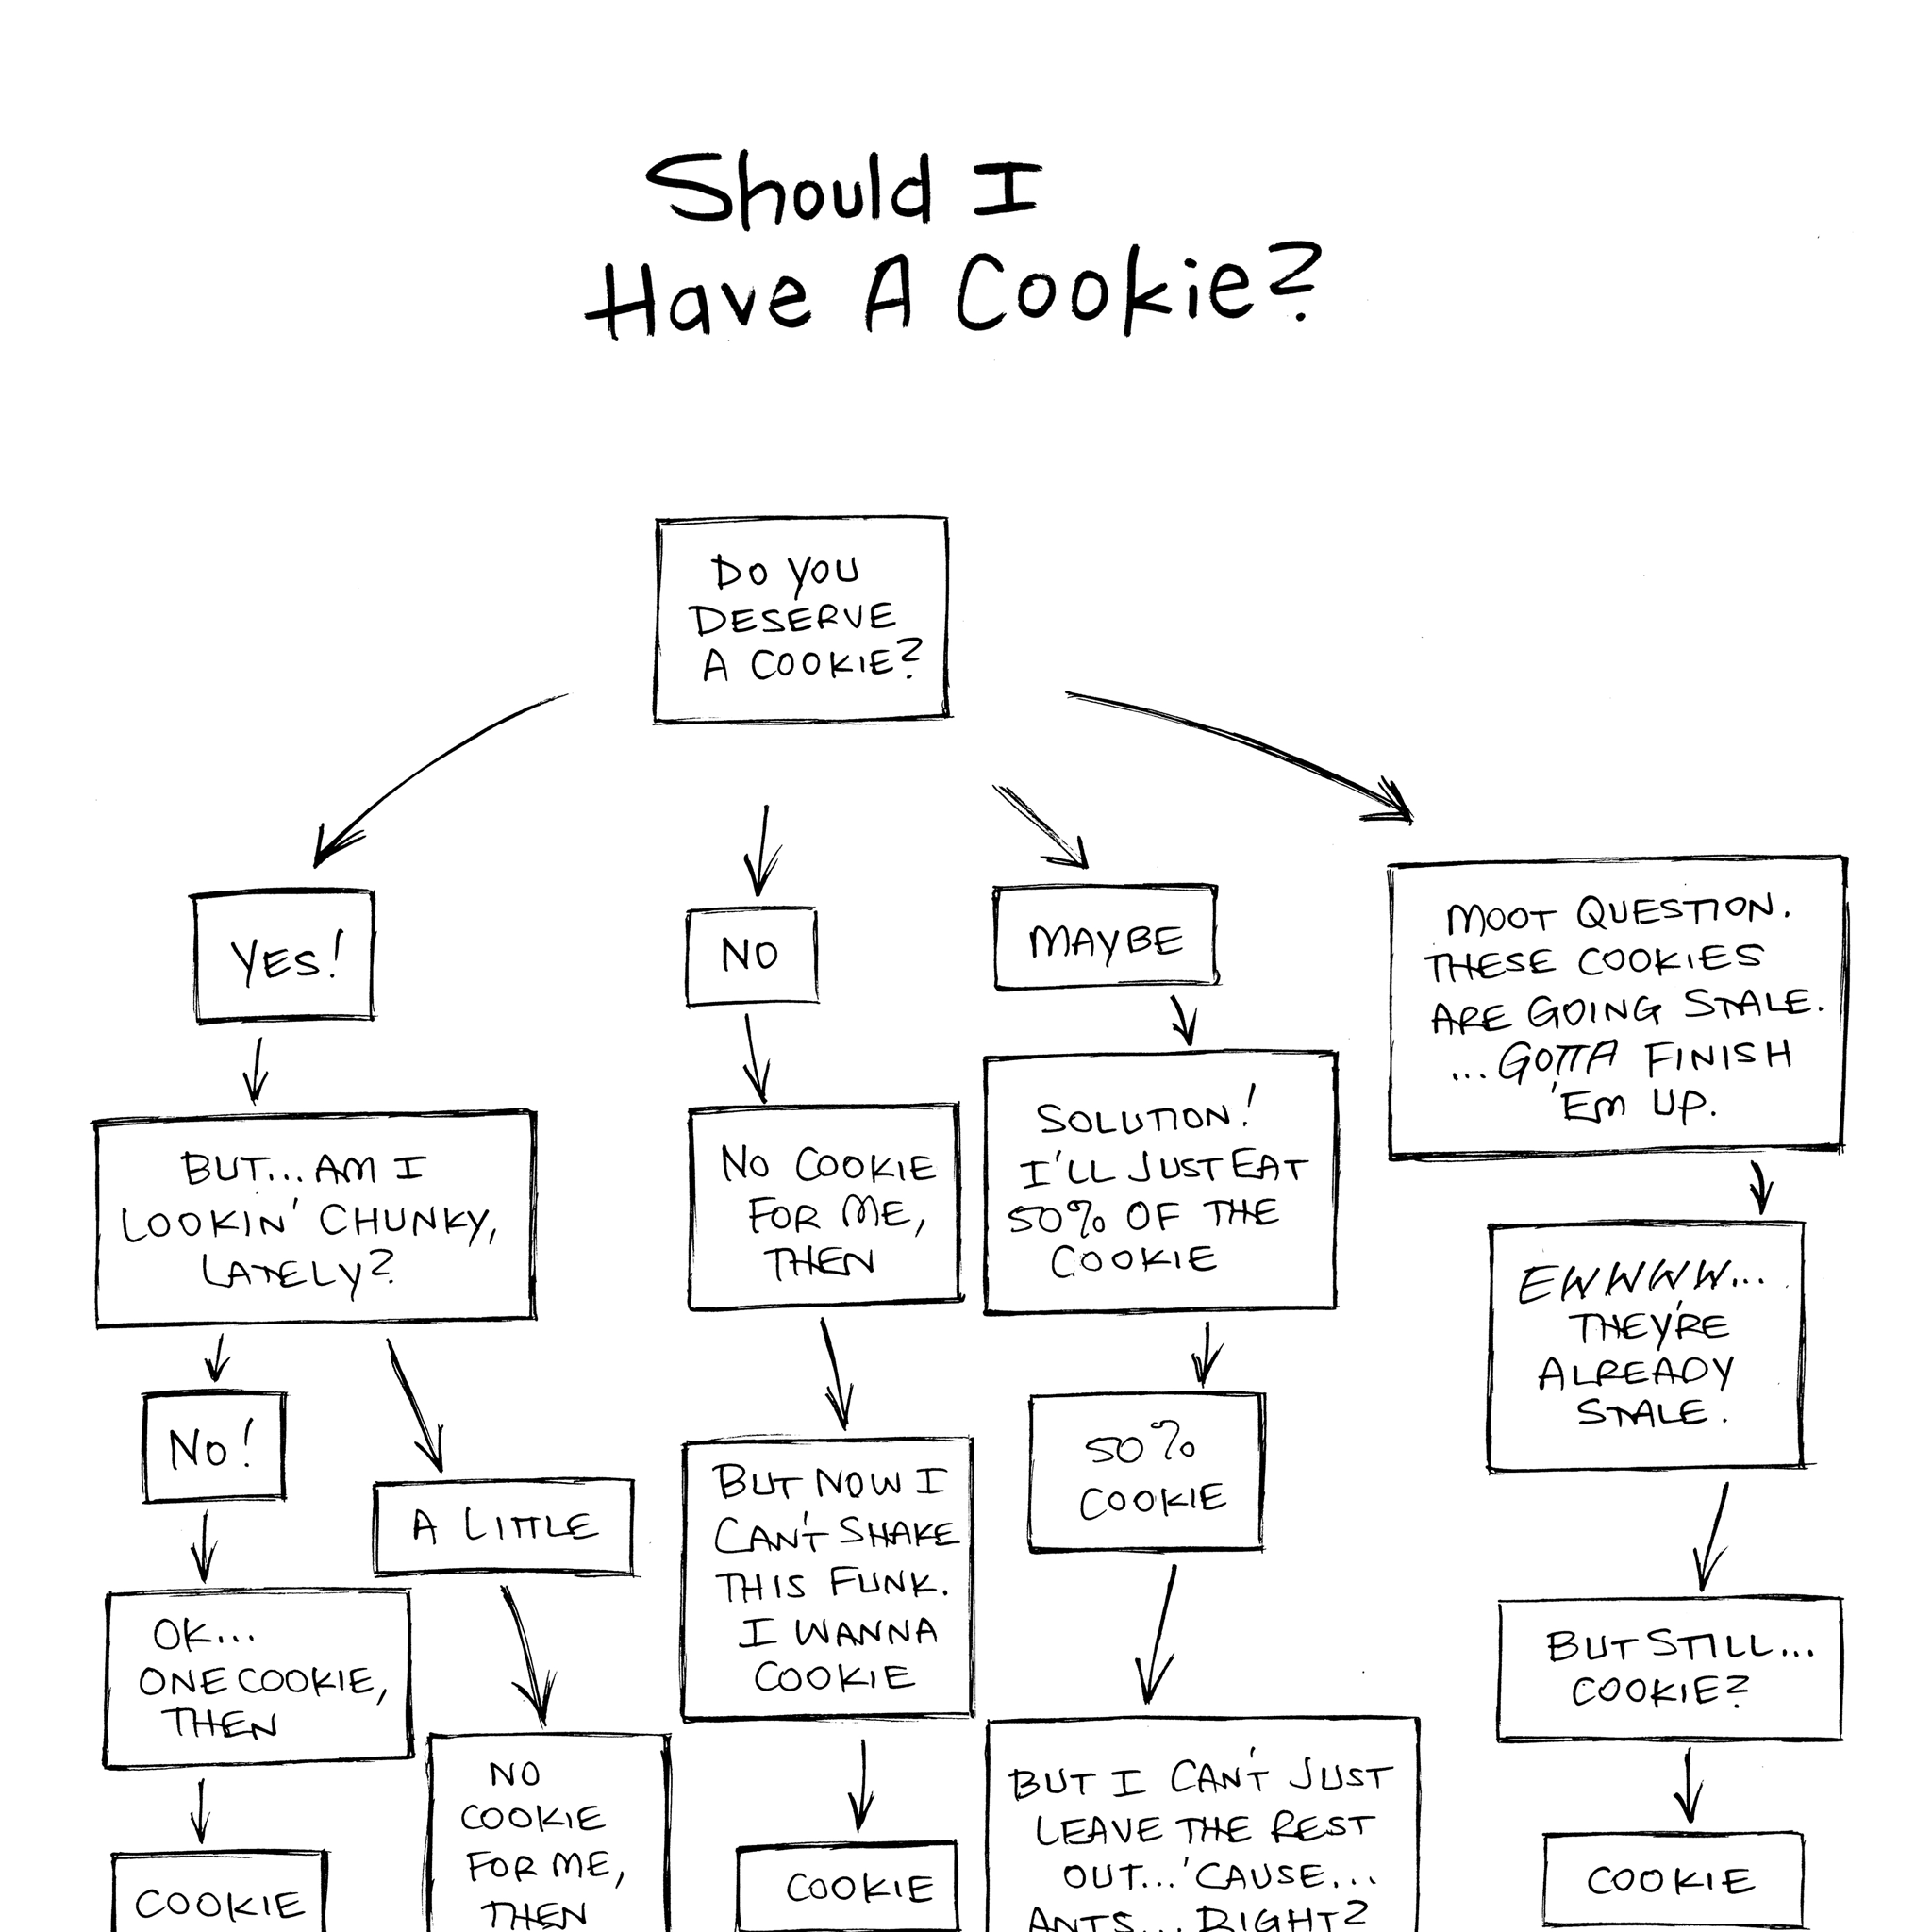 Print: Should I Have A Cookie?